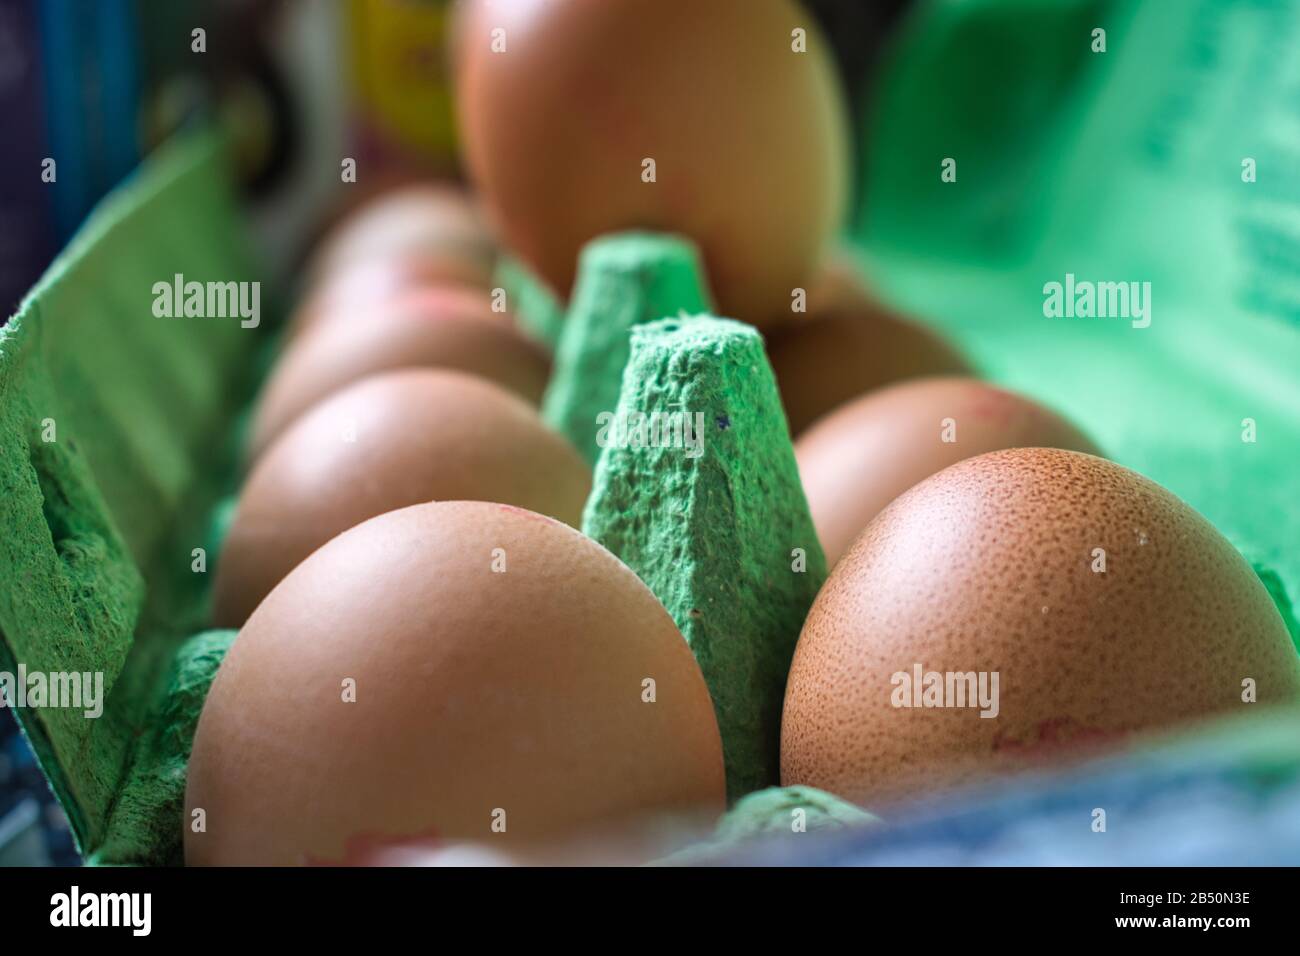 Eggs in an egg box, close up Stock Photo